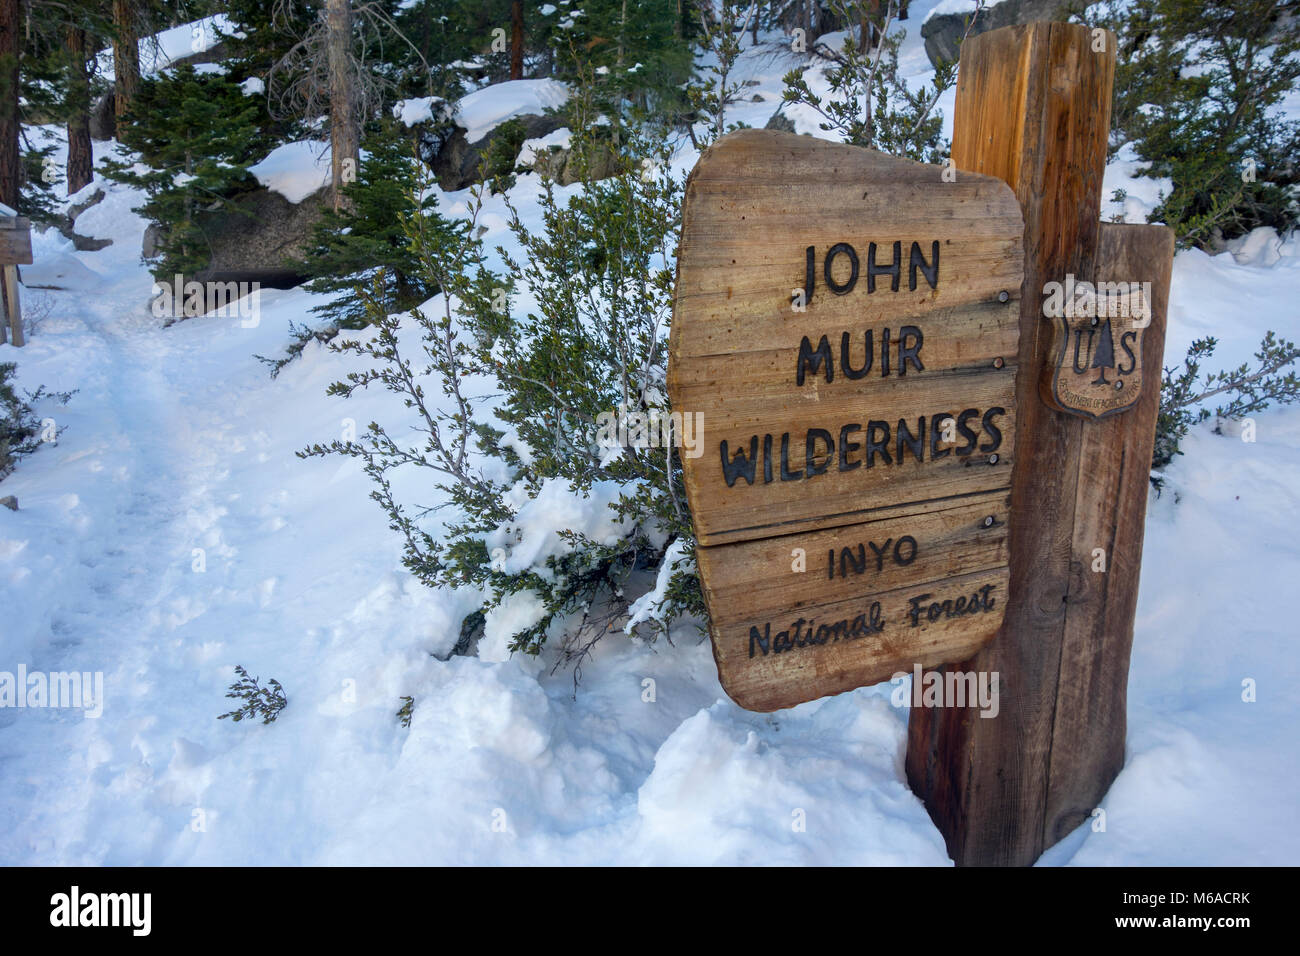 John Muir Wilderness Entrance Table on Snowy Mount Whitney Hiking Trail in Sierra Nevada Mountains  above Lone Pine California in Winter Stock Photo